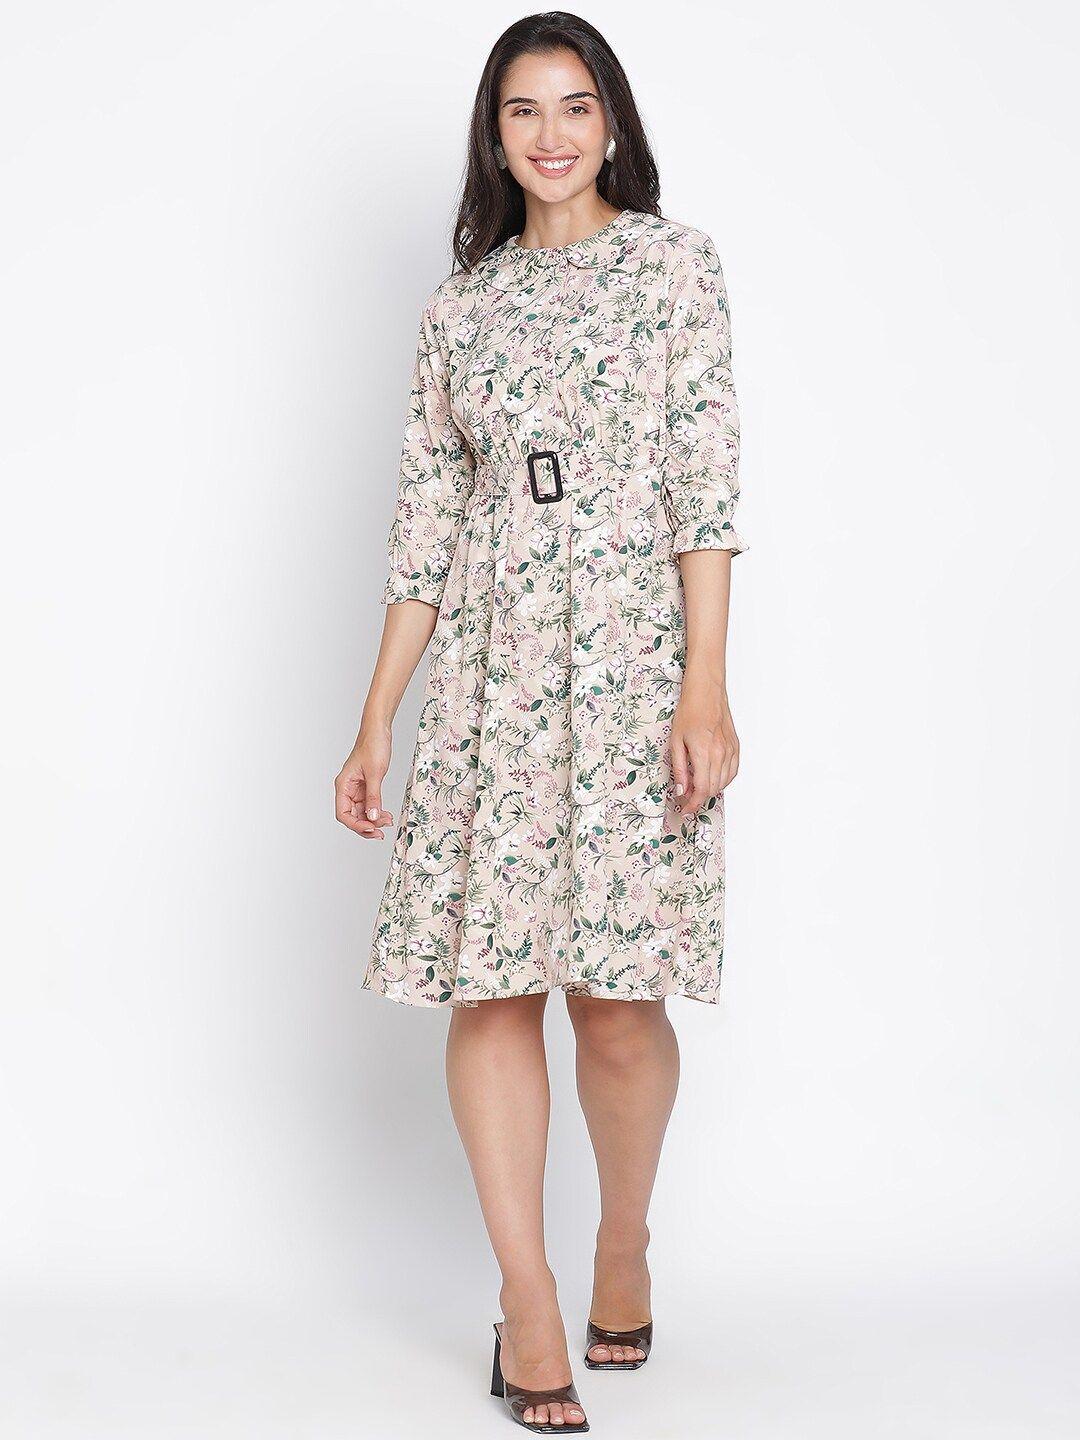 draax fashions floral printed fit & flare dress